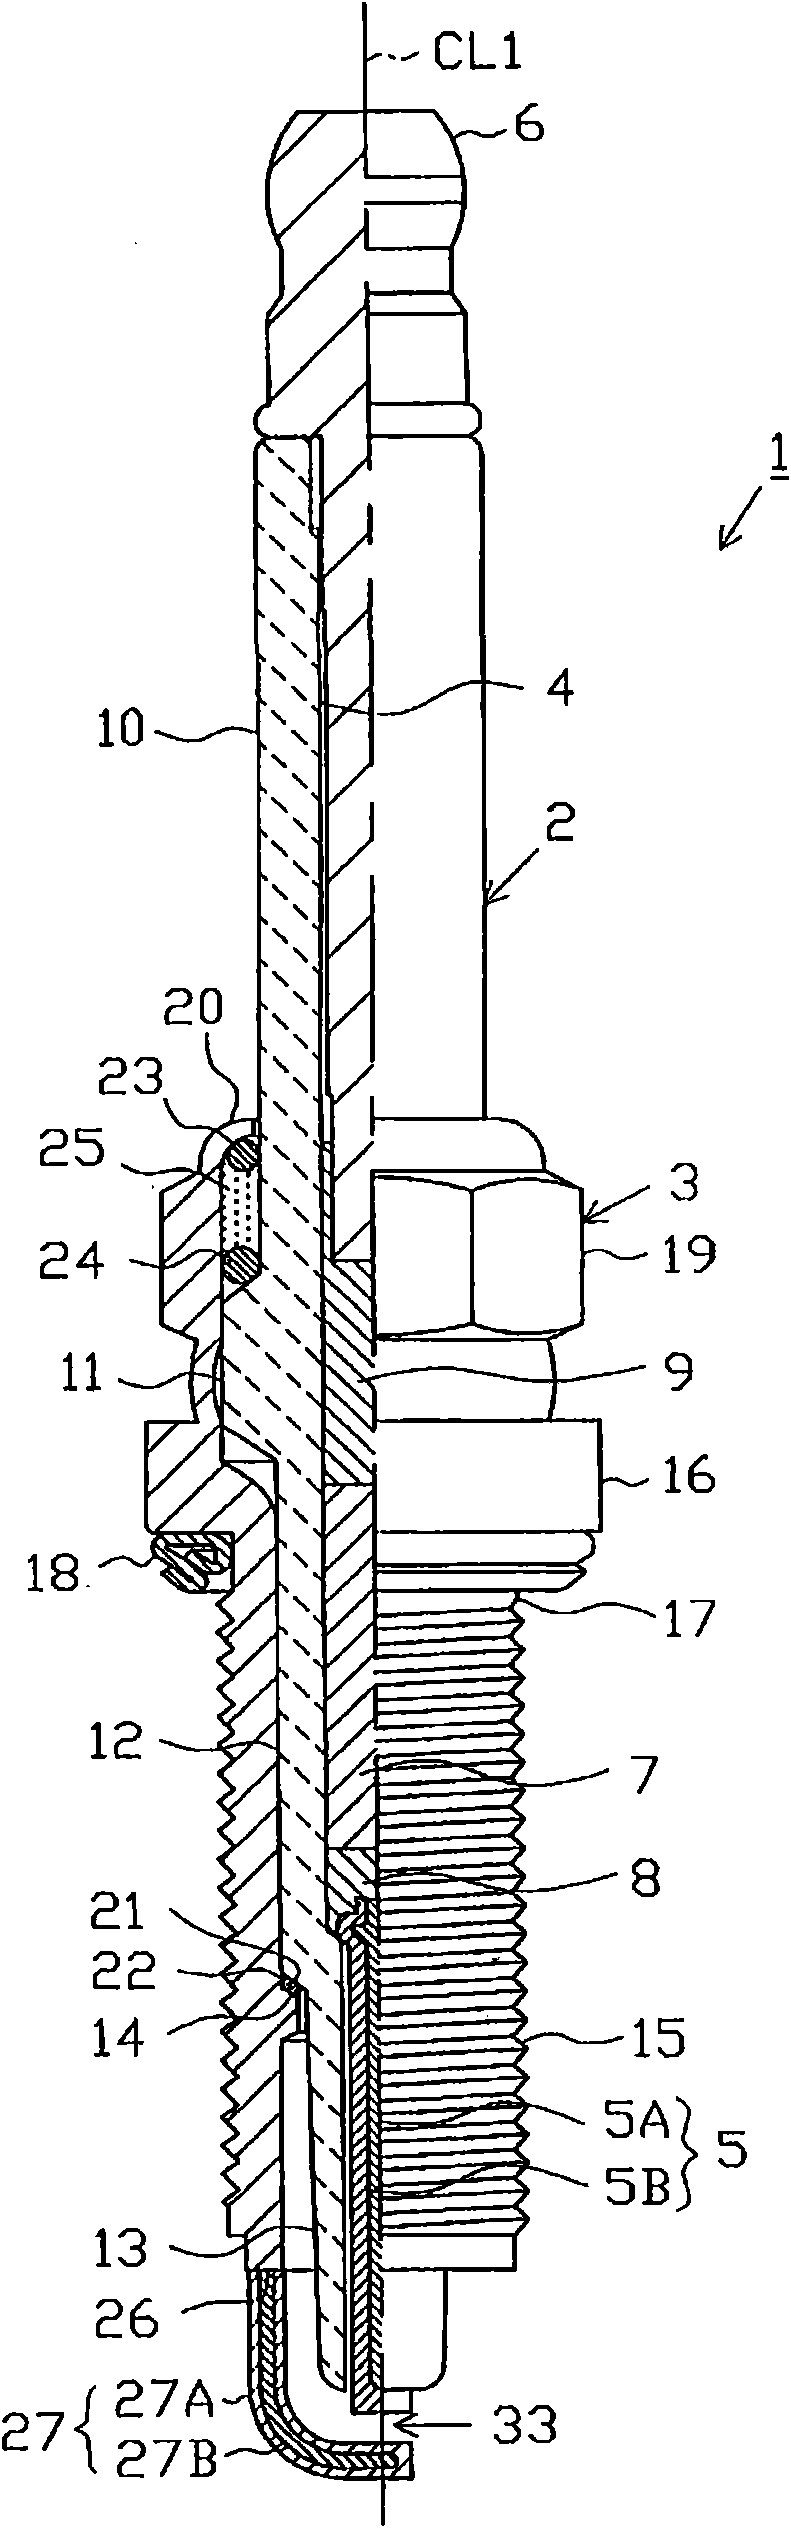 Insulator for the spark plug and the manufacturing approach thereof, together with the spark plug